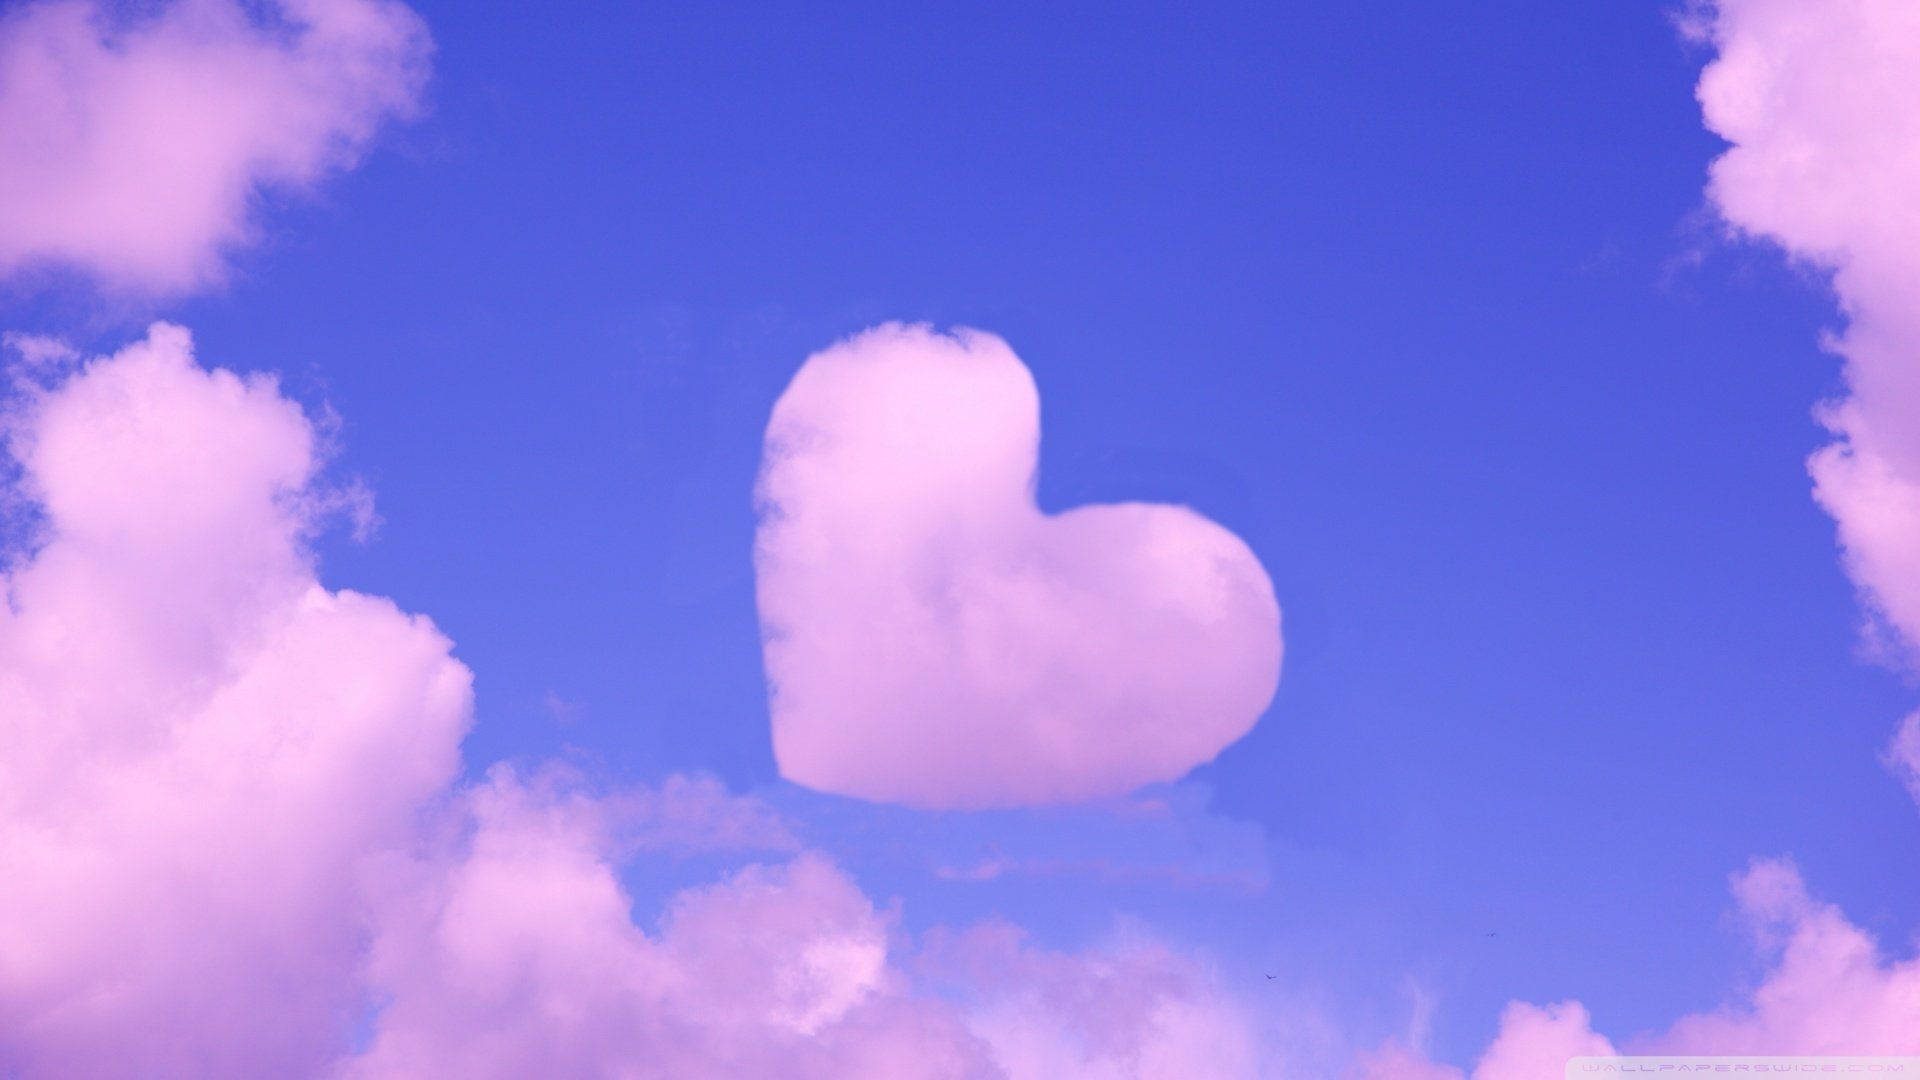 Pretty Heart Cloud Image Background